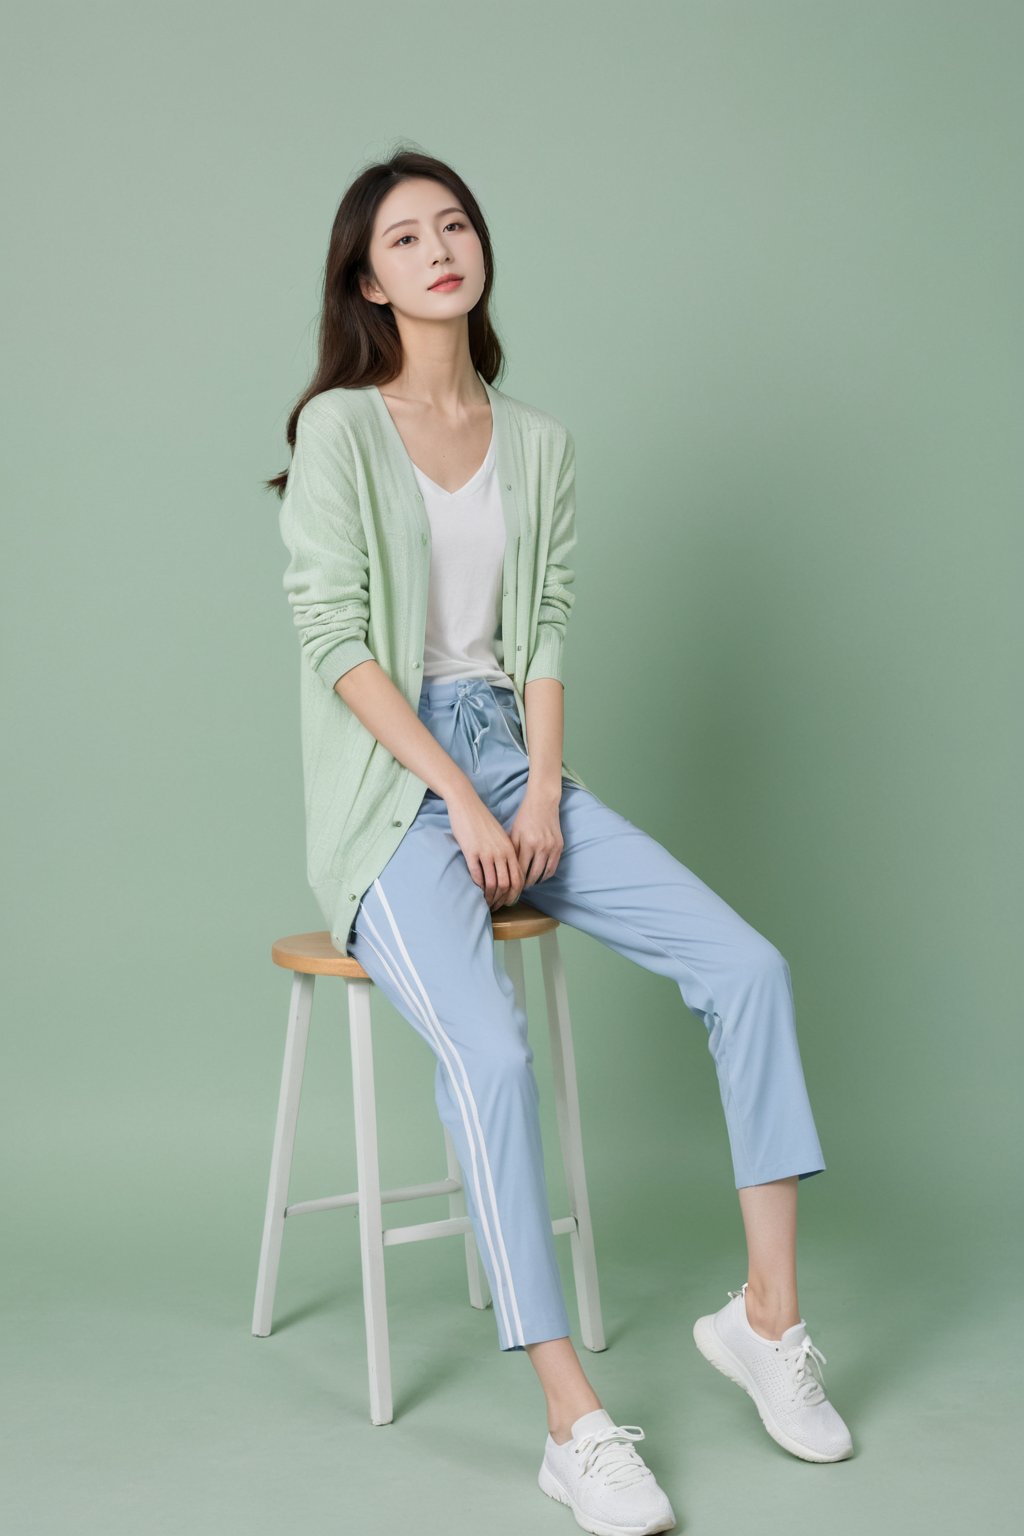 Asian female relax,Thin cardigan sweater,Capris,sports shoes,OOTD,Outfit of the Day,full_body,solo,simple_background,light green background,